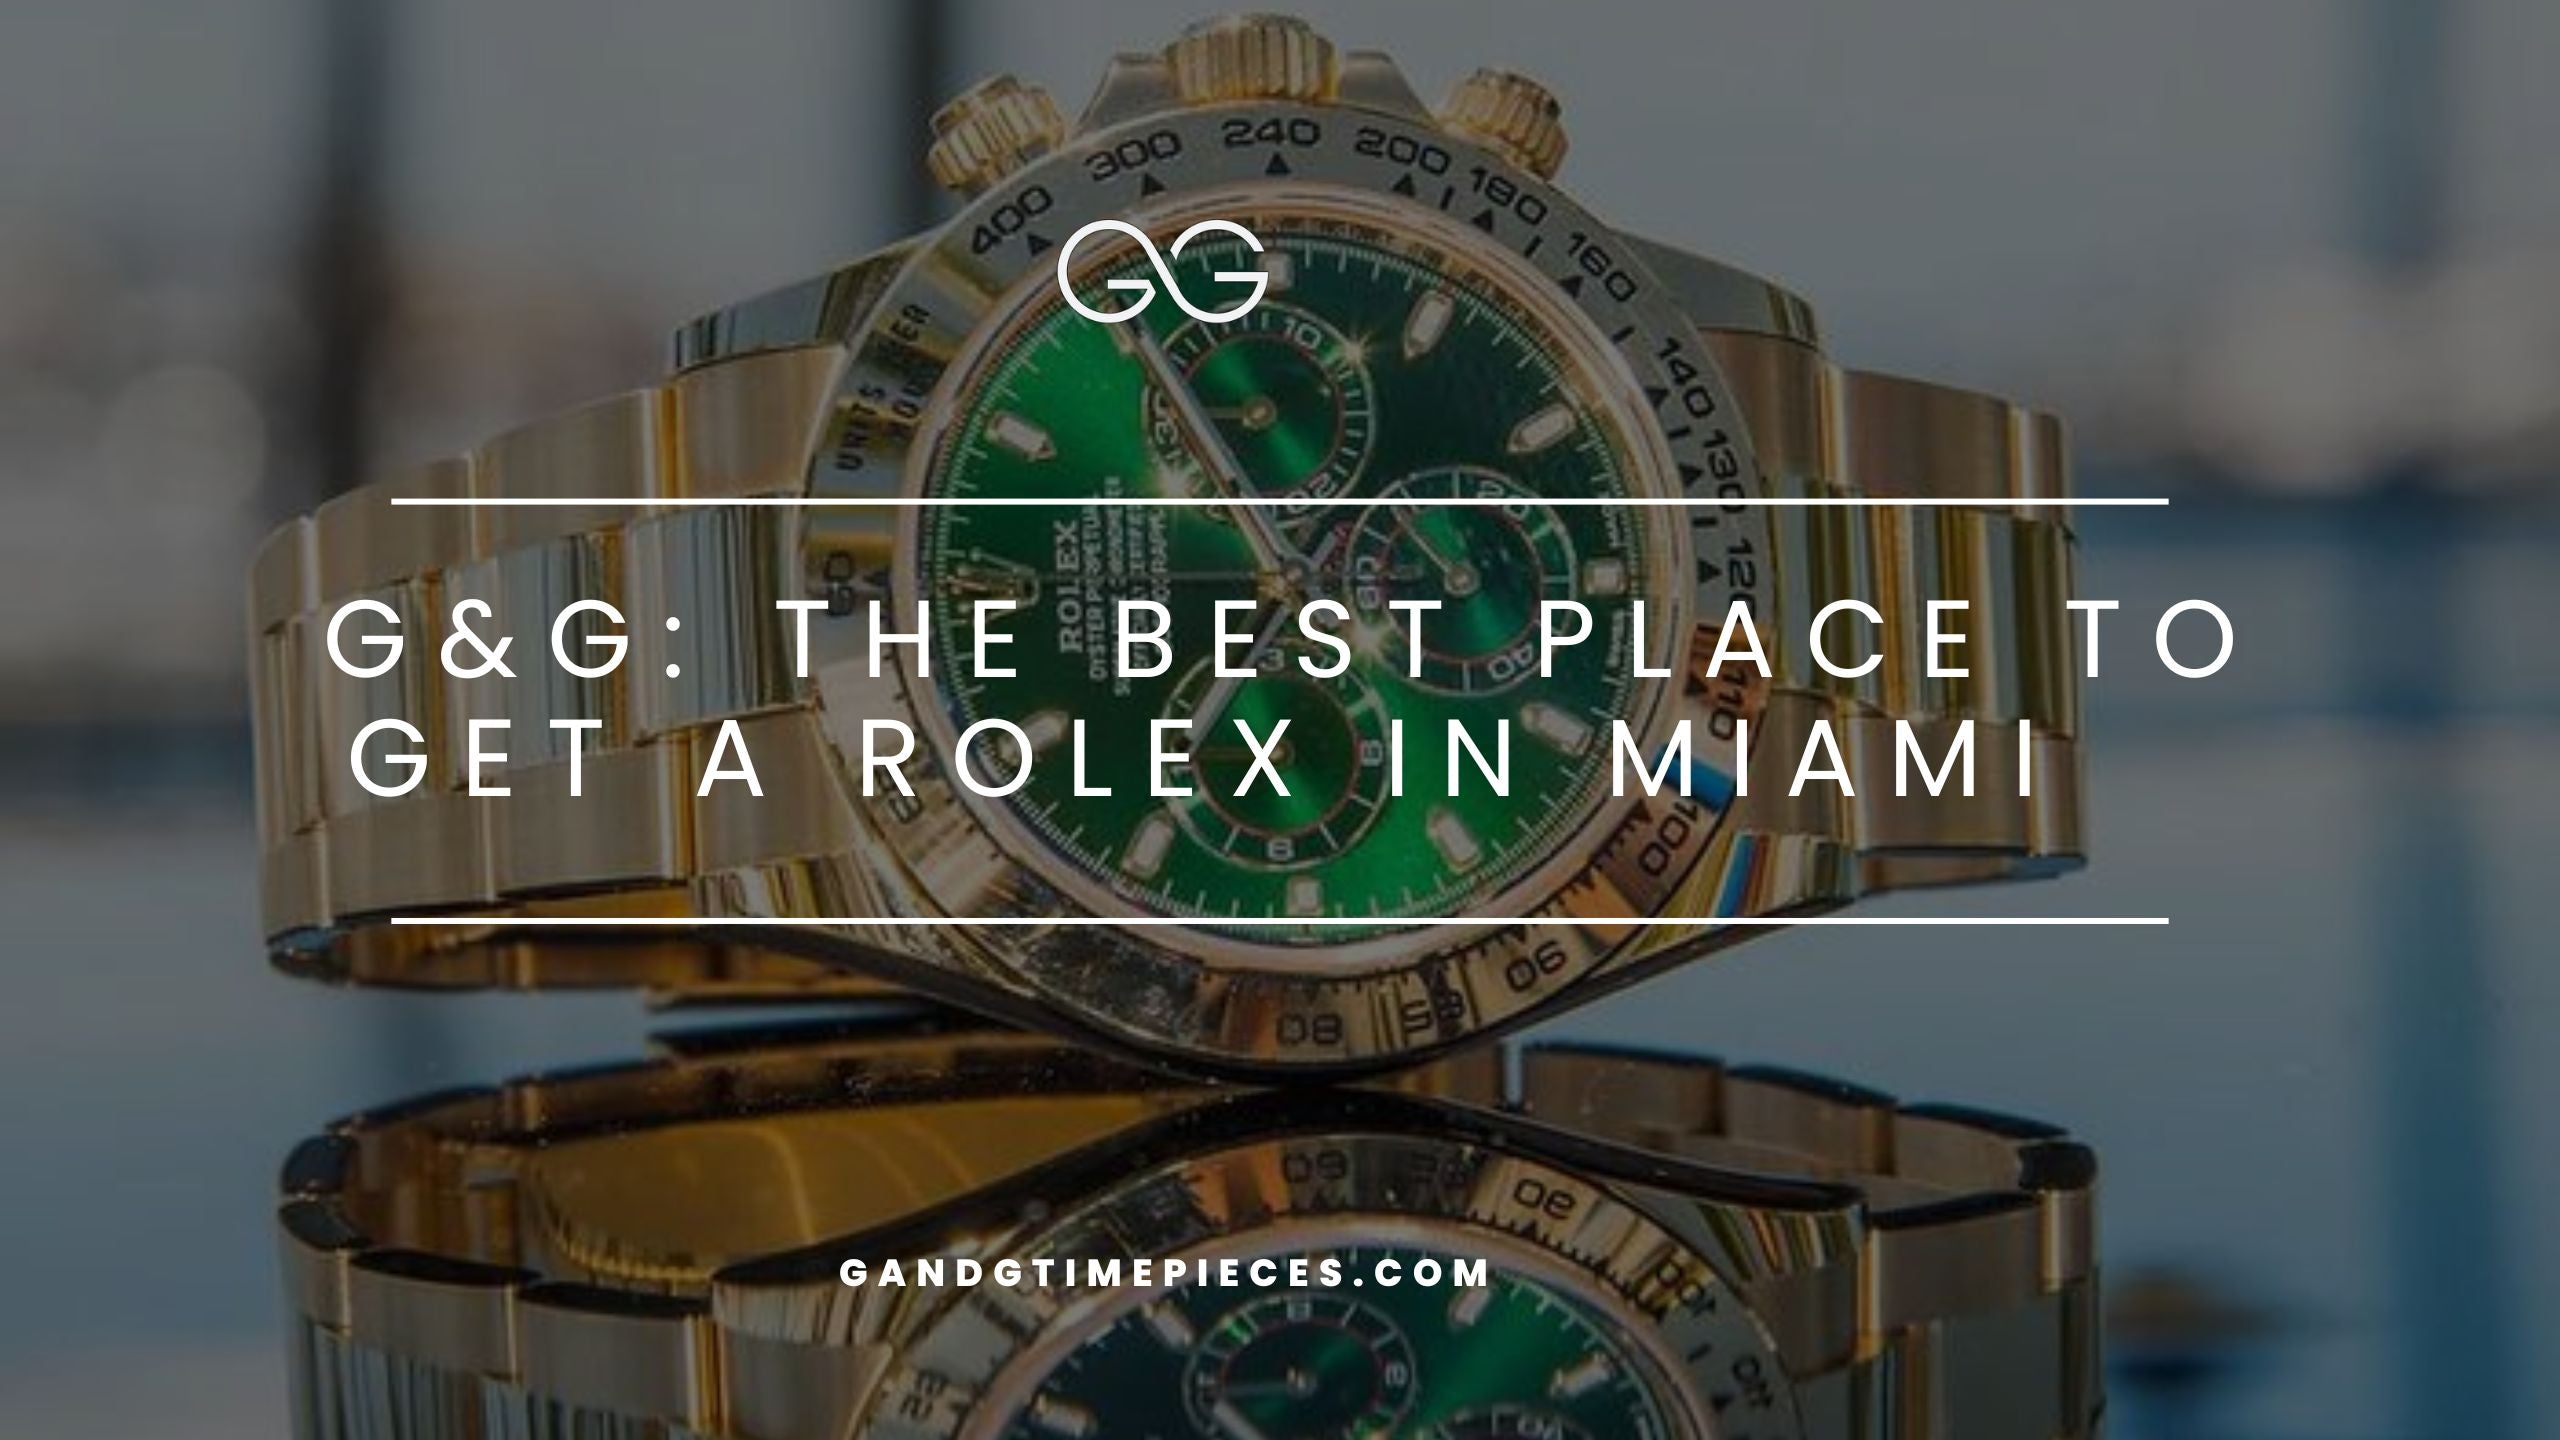 G&G: The Best Place to Get a Rolex in Miami